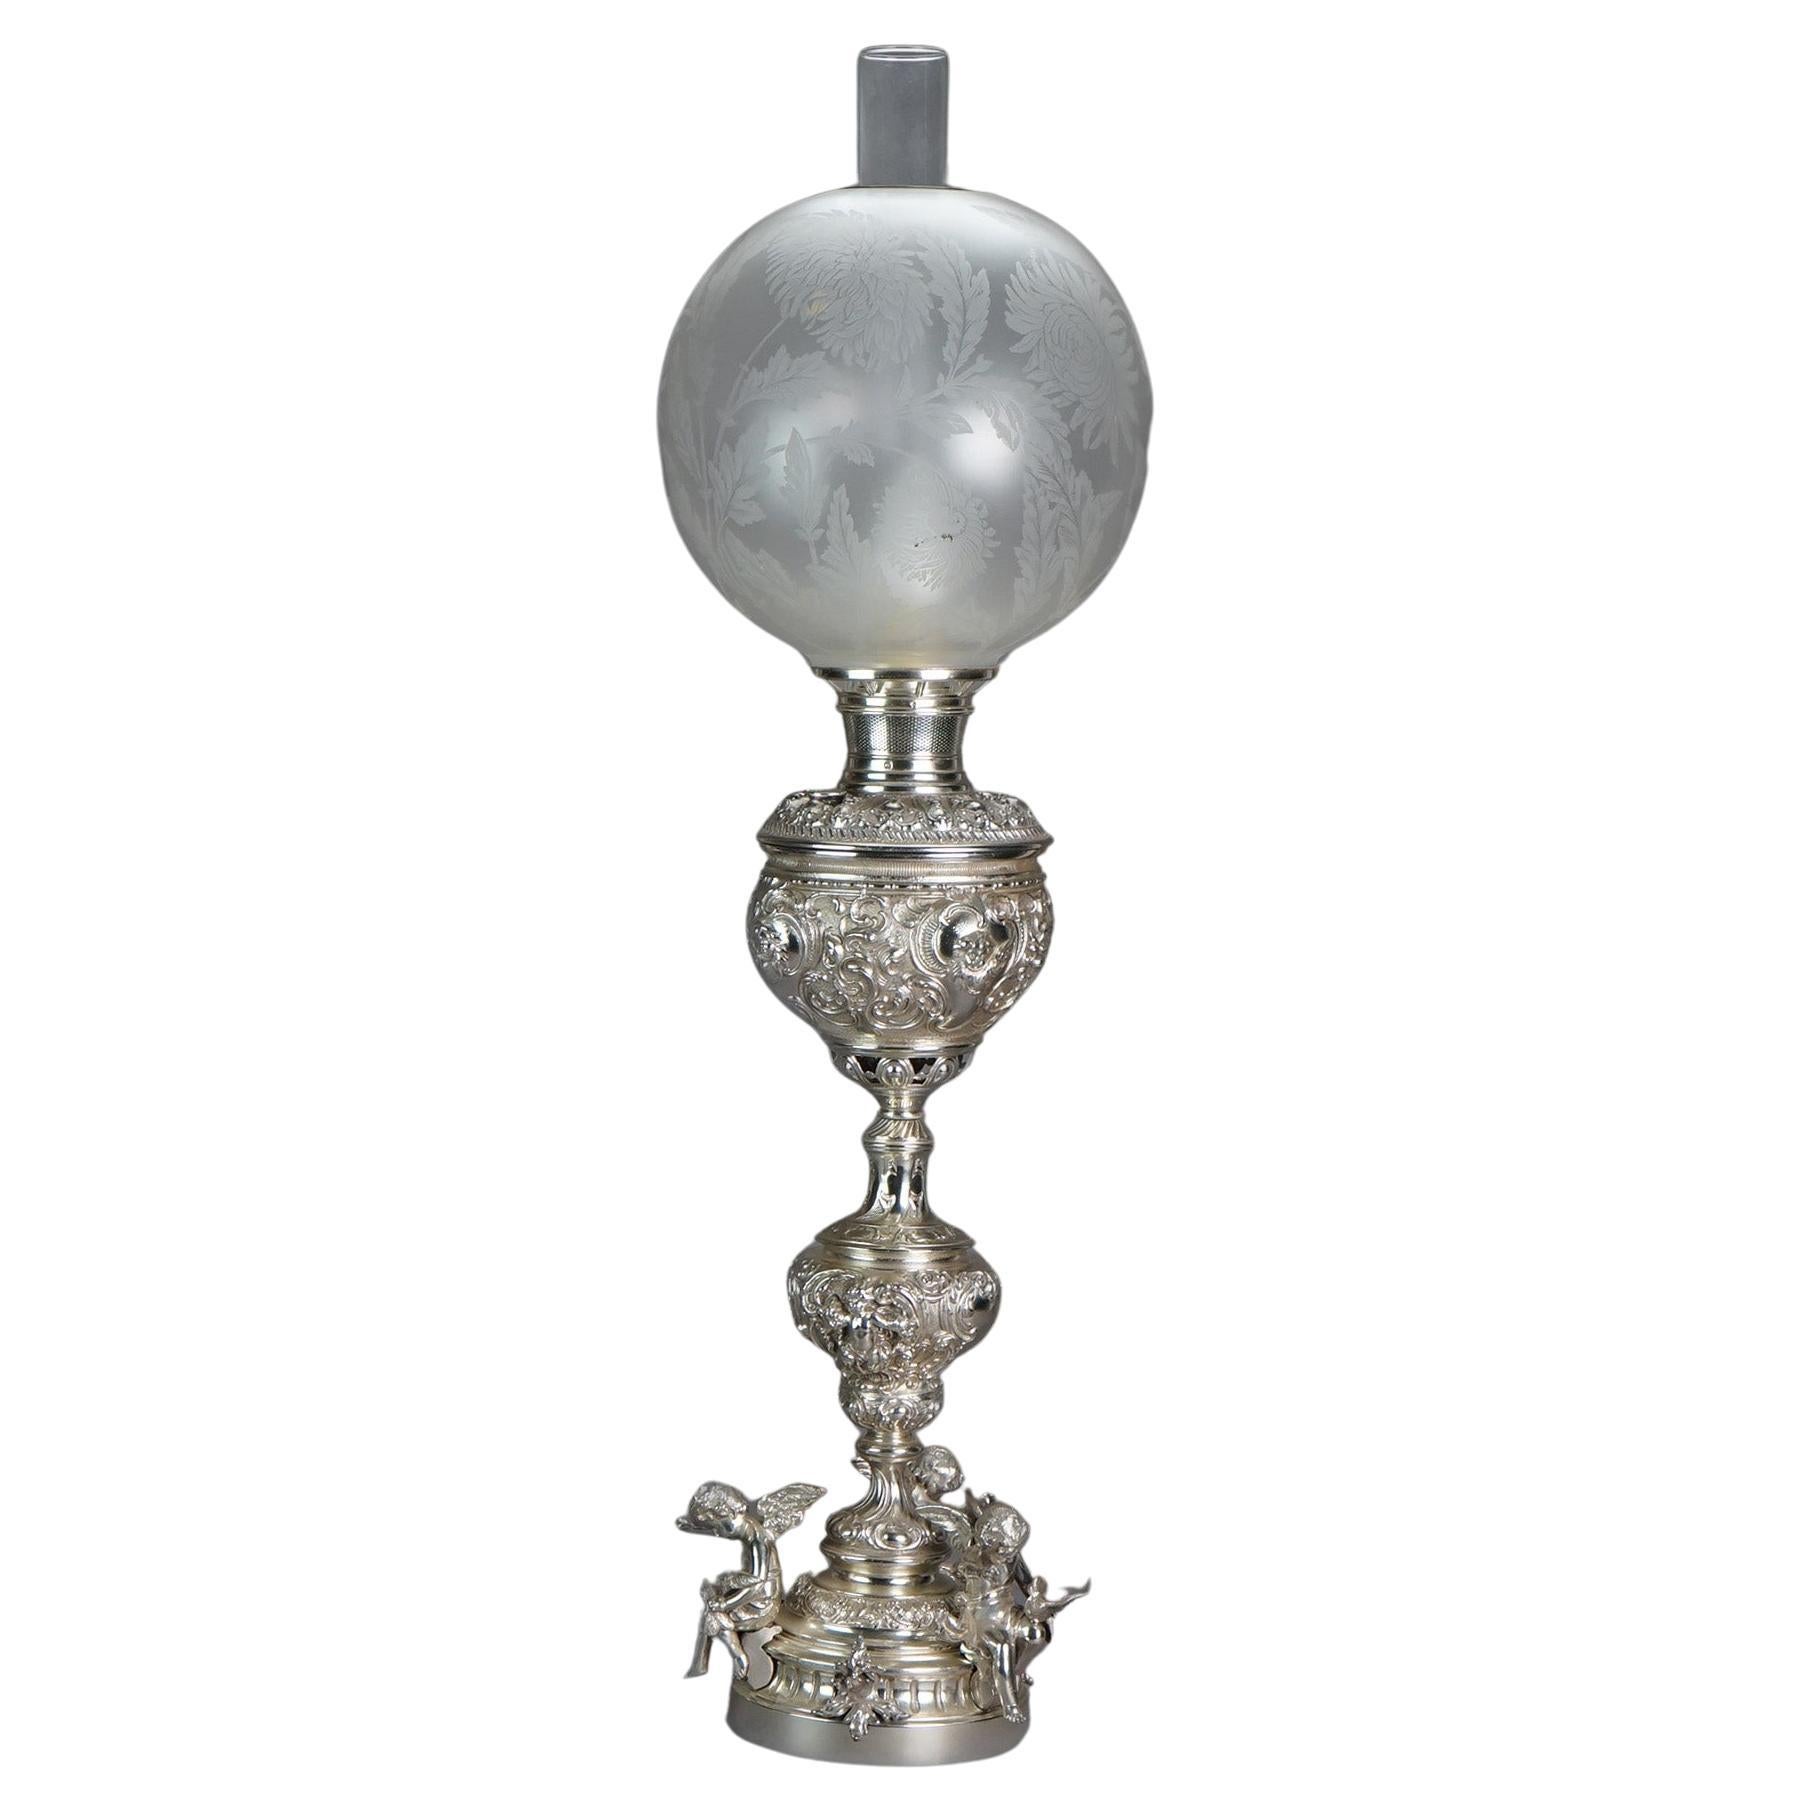 Antique Rococo Figural Silver Plate Parlor Lamp With Winged Cherubs c1890 For Sale